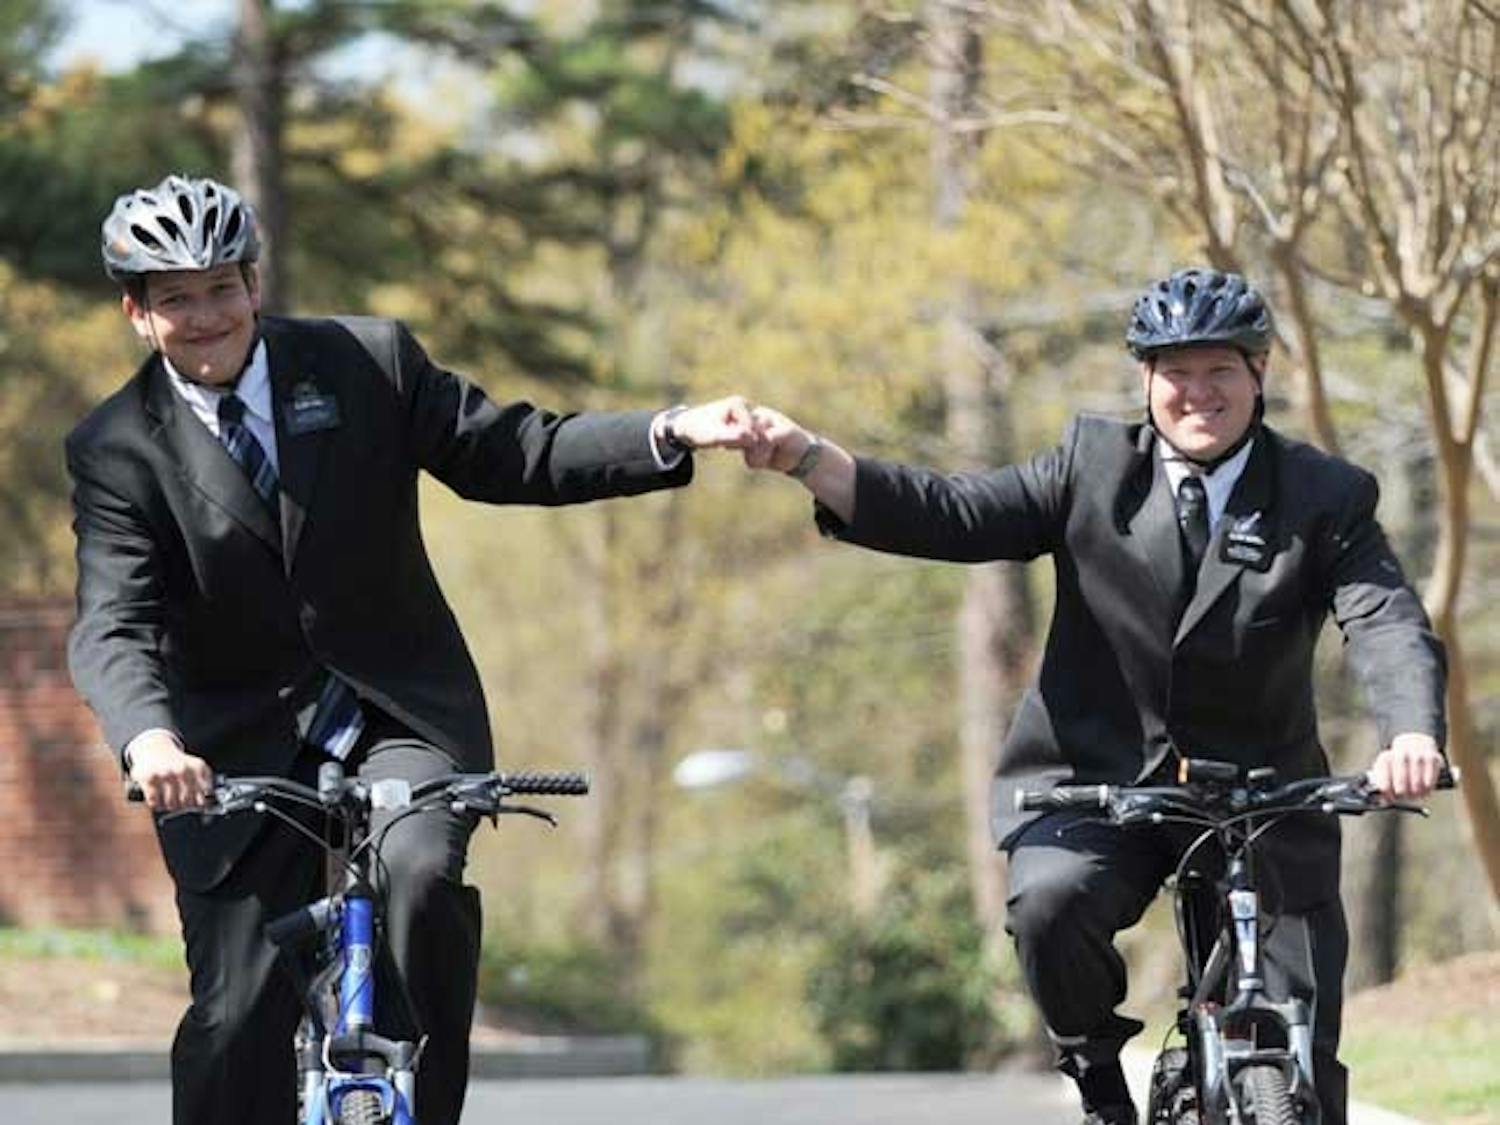 Having only been provided bicycles for transportation, Elder Call, on the left, and Elder Merrill, on the right, are required to stay within sight and sound of each other at all times. 